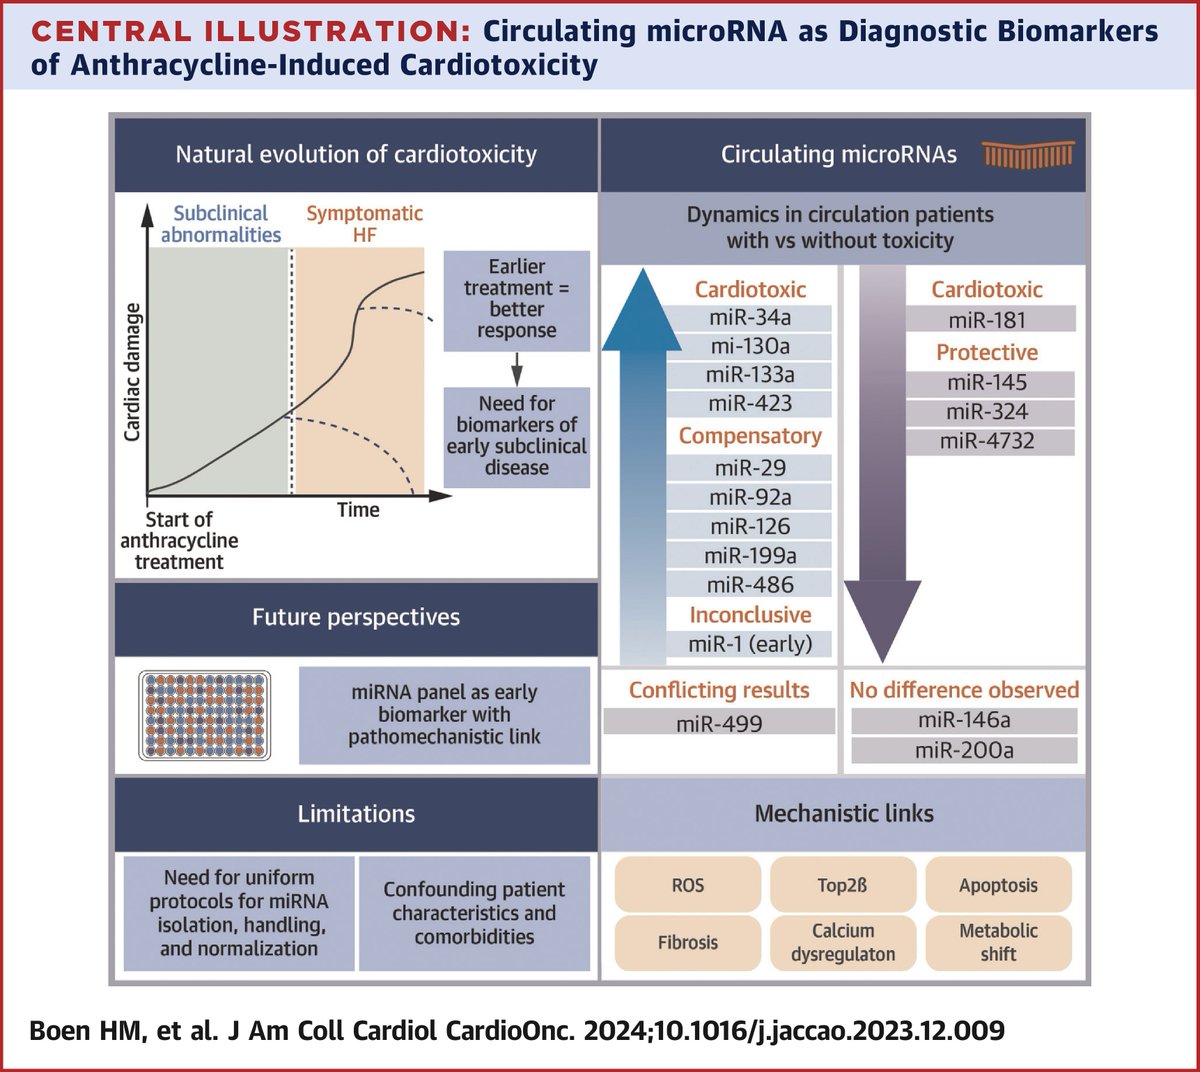 New specific biomarkers for cancer therapy-related cardiac dysfunction with a direct pathomechanistic link: Are circulating microRNAs ready for clinical practice? bit.ly/4db8vCa #JACCCardioOnc #CardioOnc #microRNAs #Anthracycline #Cardiotoxicity